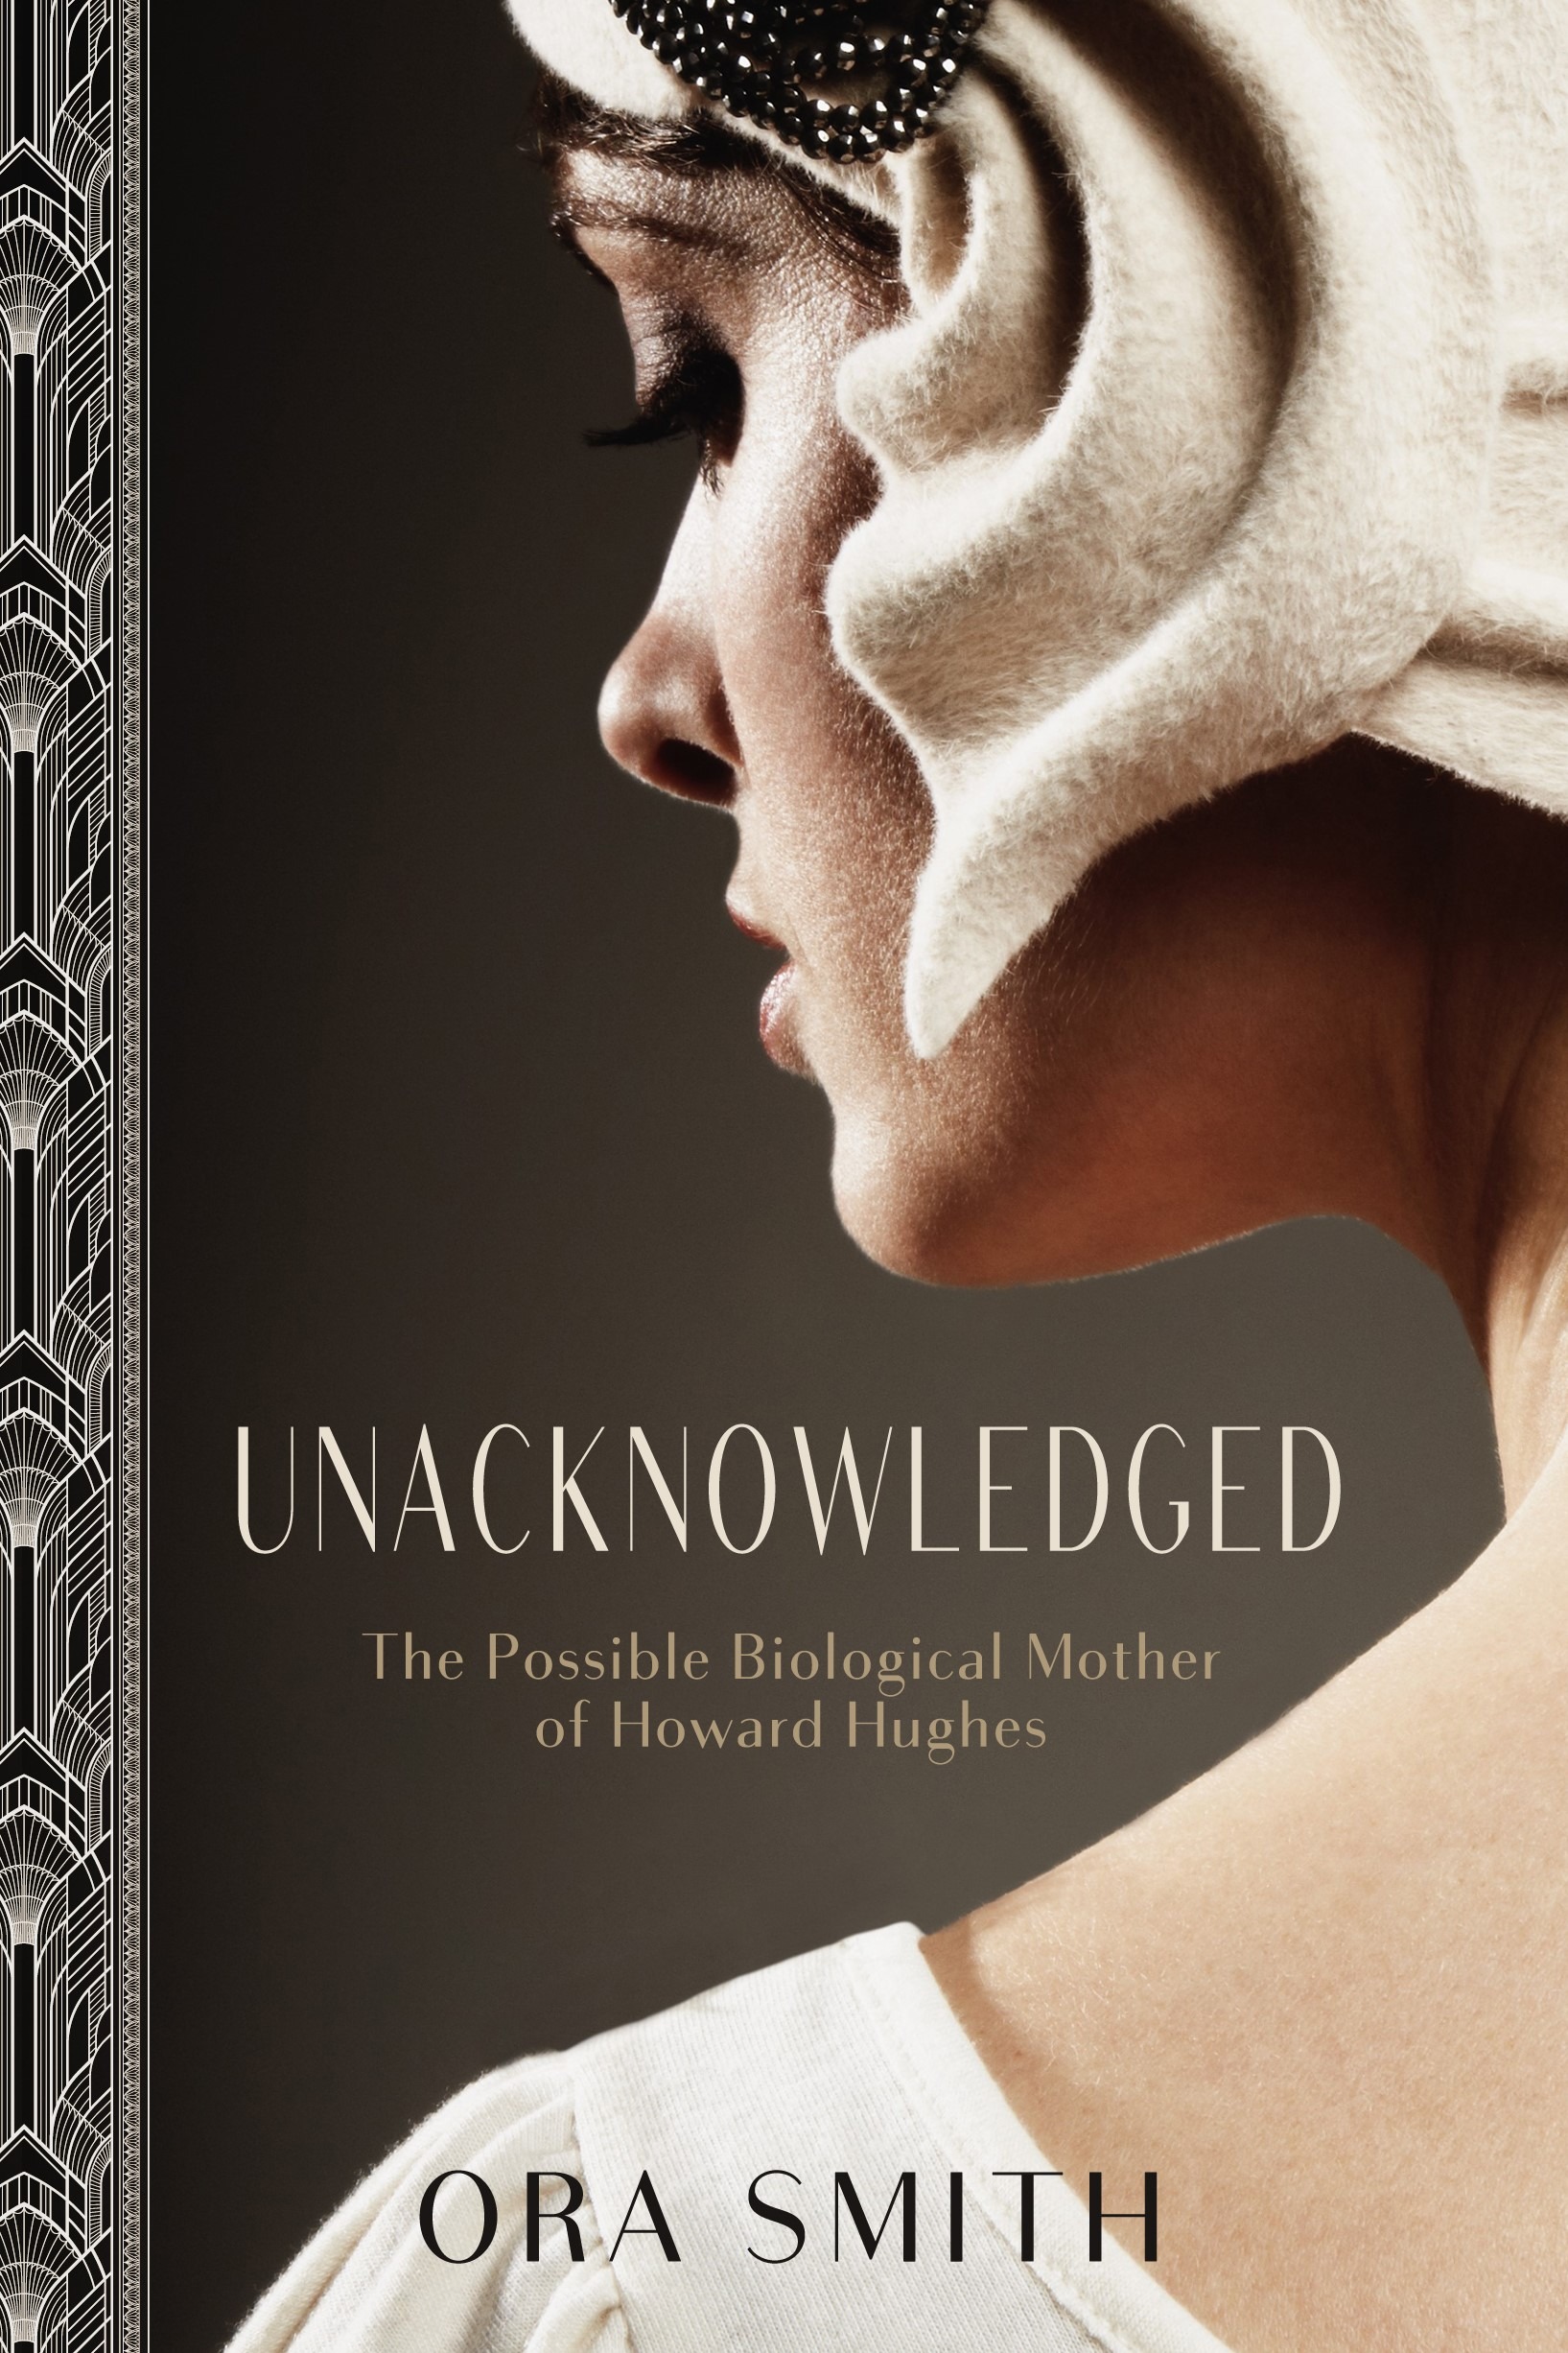 Unacknowledged: The Possible Biological Mother of Howard Hughes